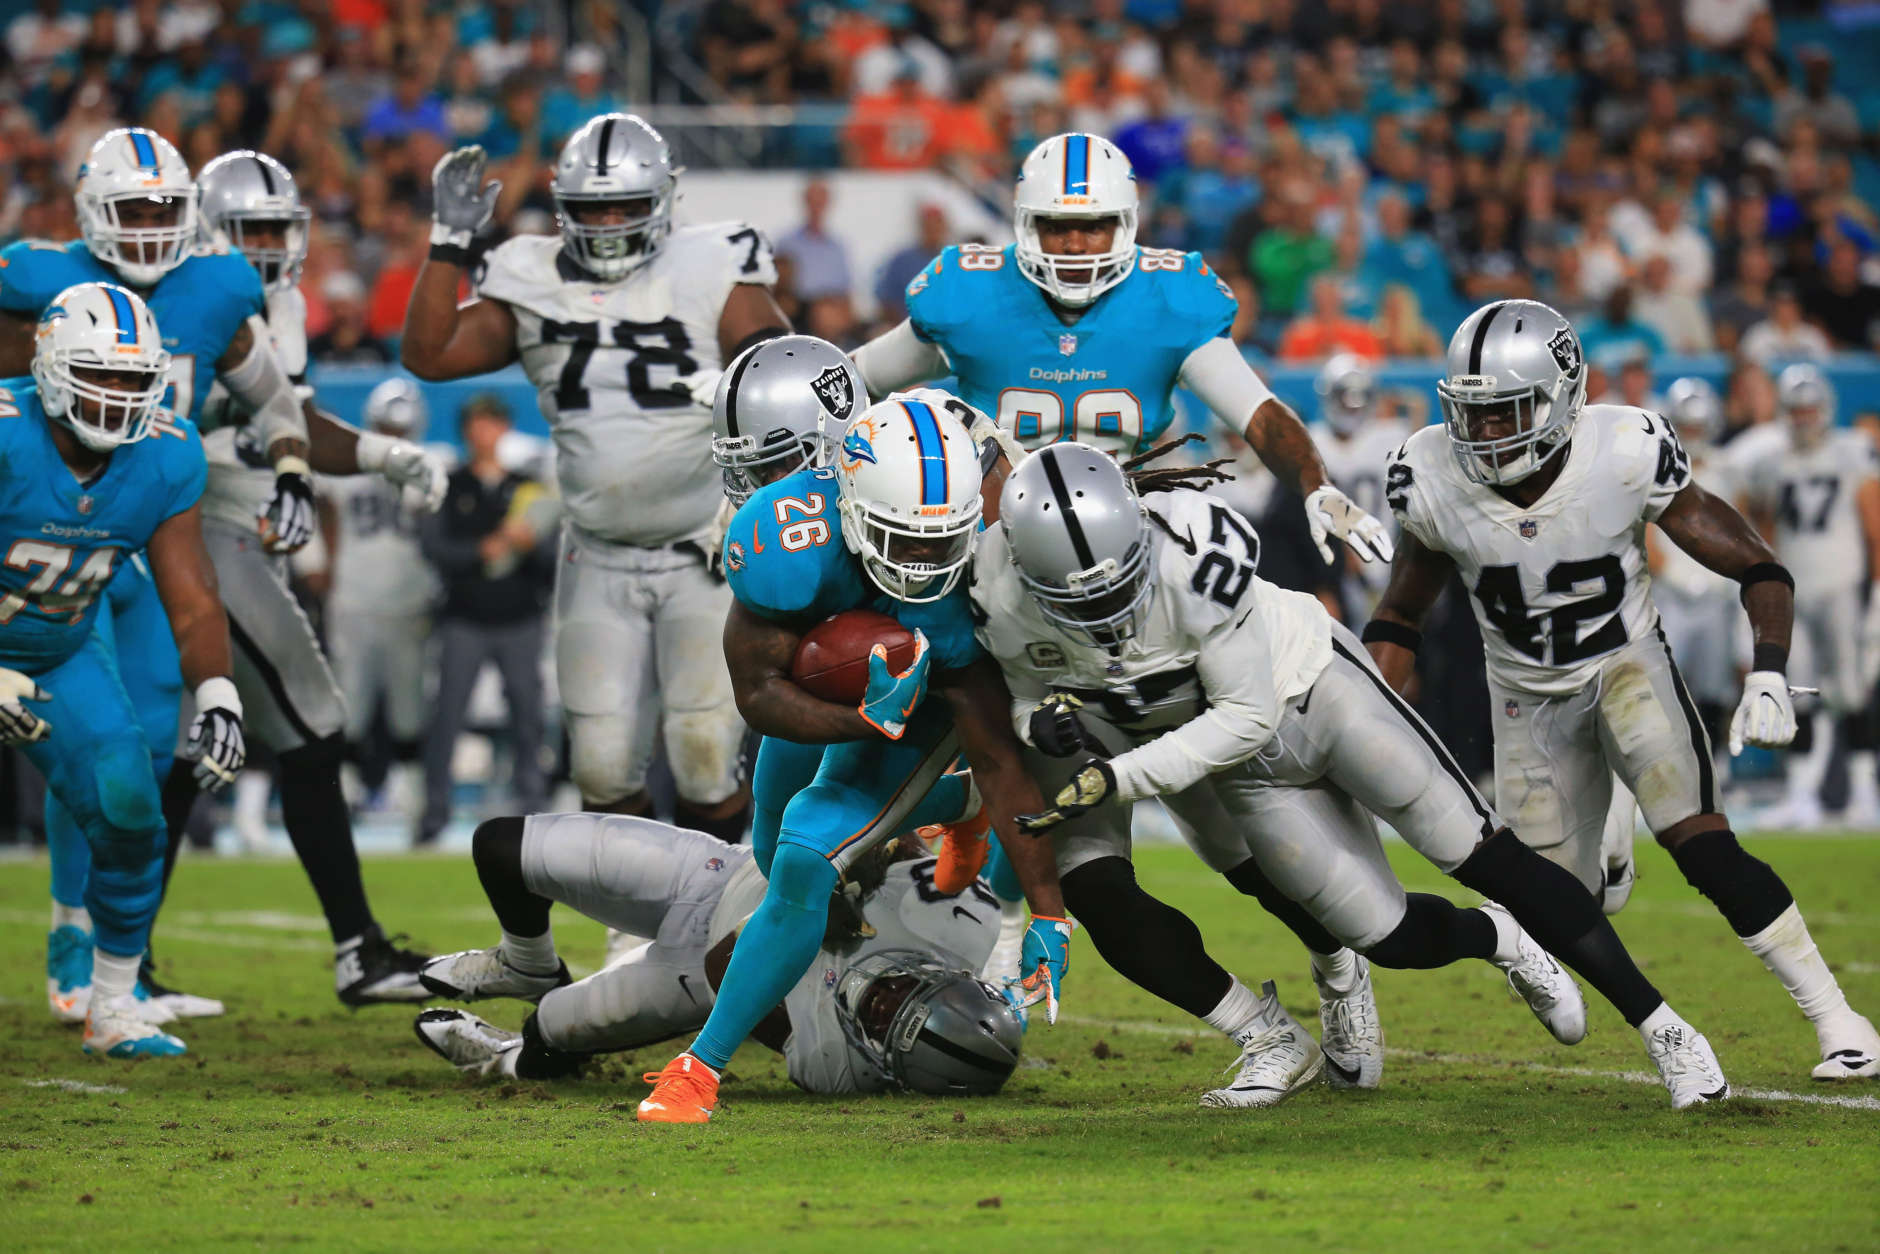 MIAMI GARDENS, FL - NOVEMBER 05: Running back Damien Williams #26 of the Miami Dolphins is tackled by free safety Reggie Nelson #27 of the Oakland Raiders at Hard Rock Stadium on November 5, 2017 in Miami Gardens, Florida.  (Photo by Chris Trotman/Getty Images)